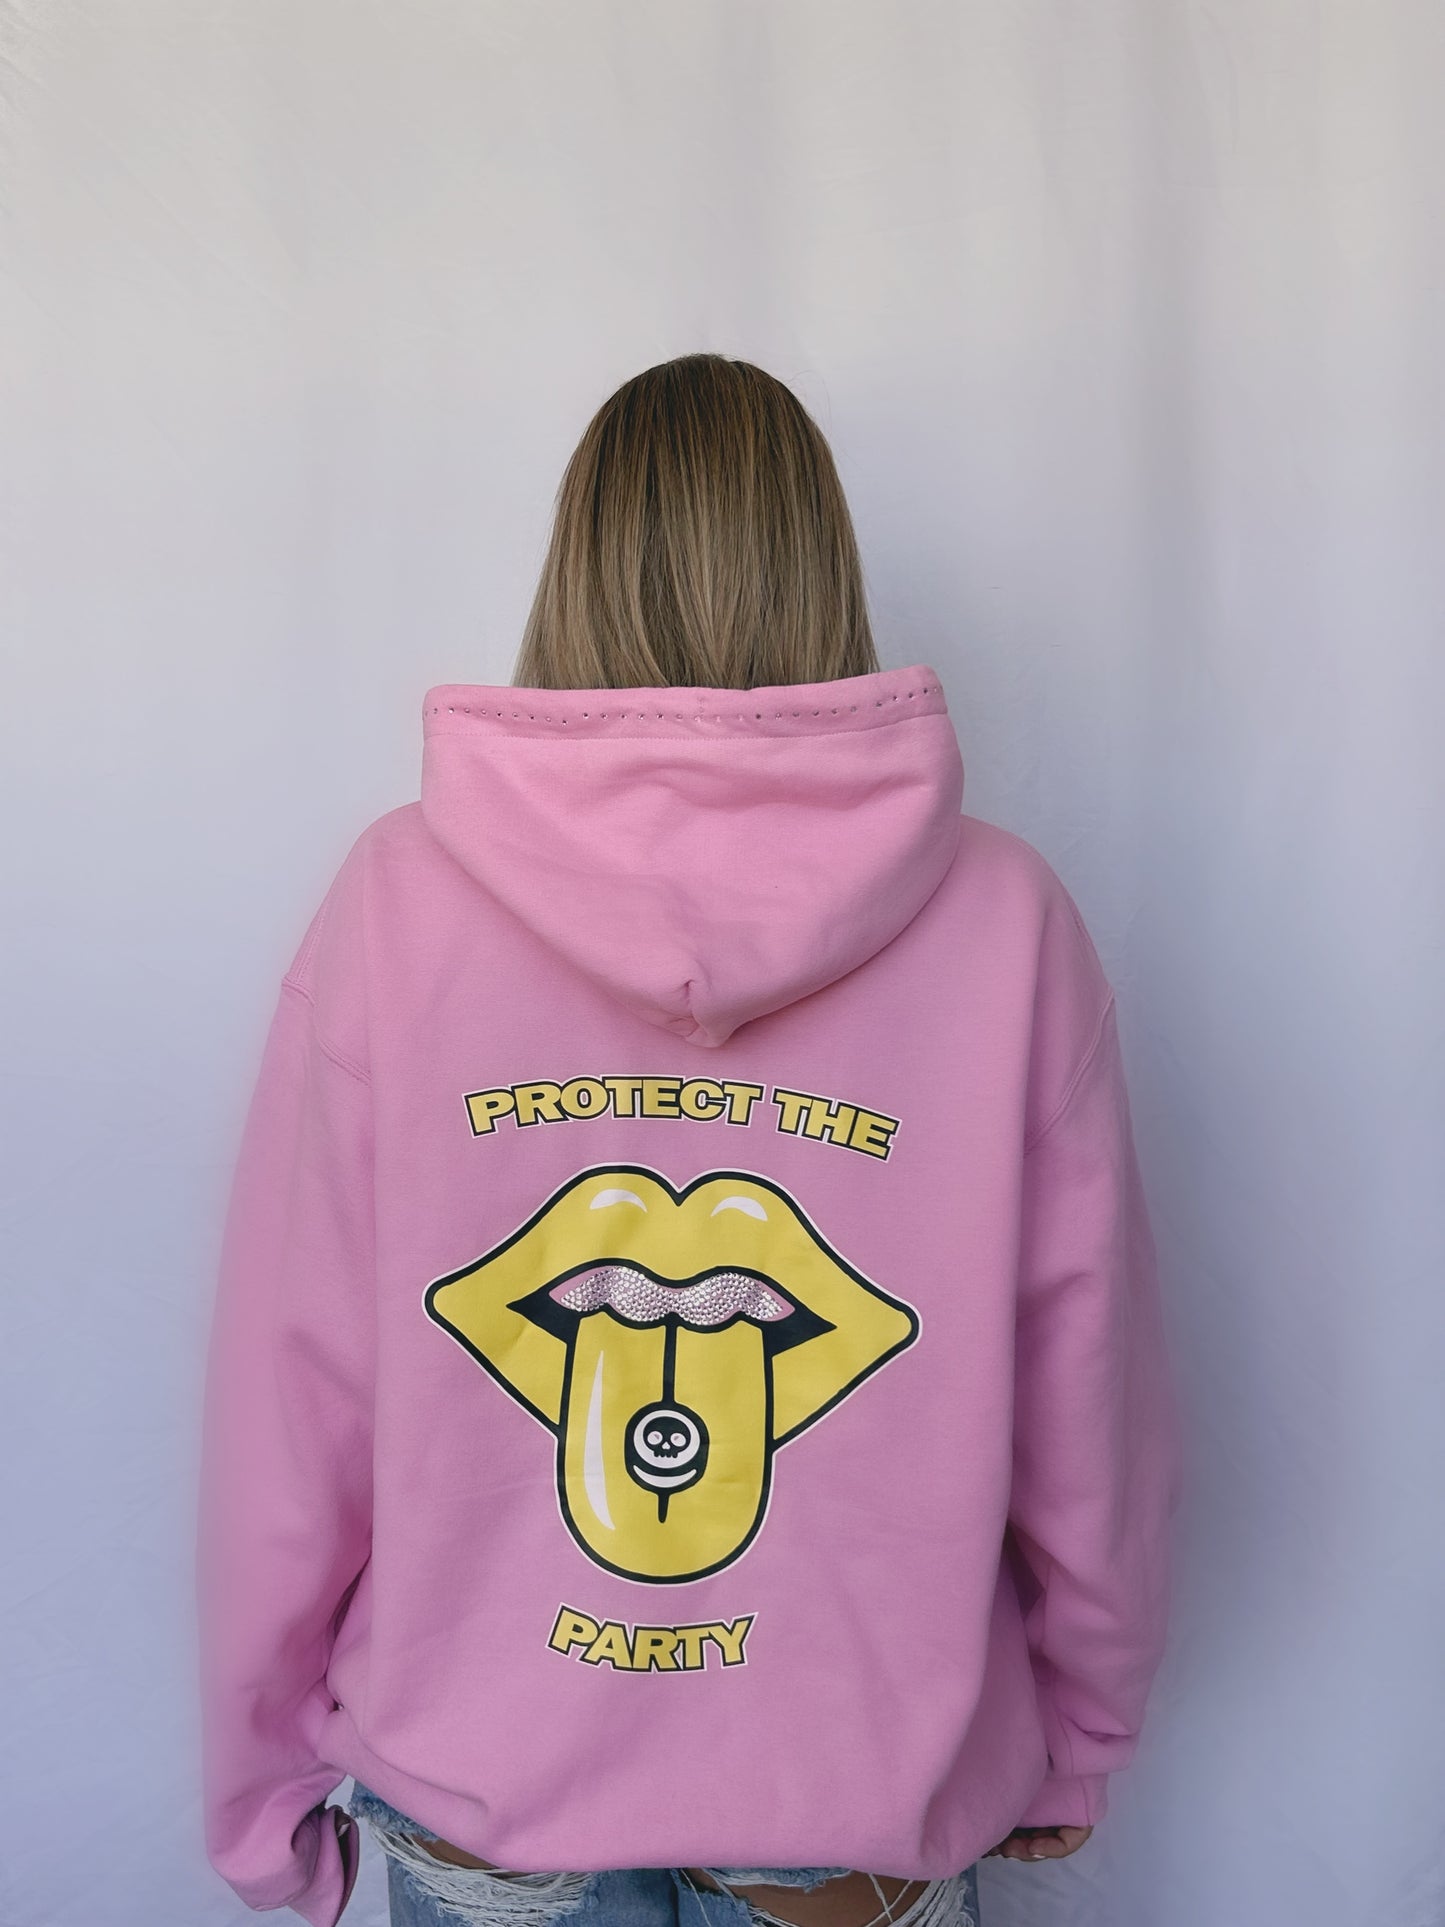 Protect the Party Hoodie (pink)